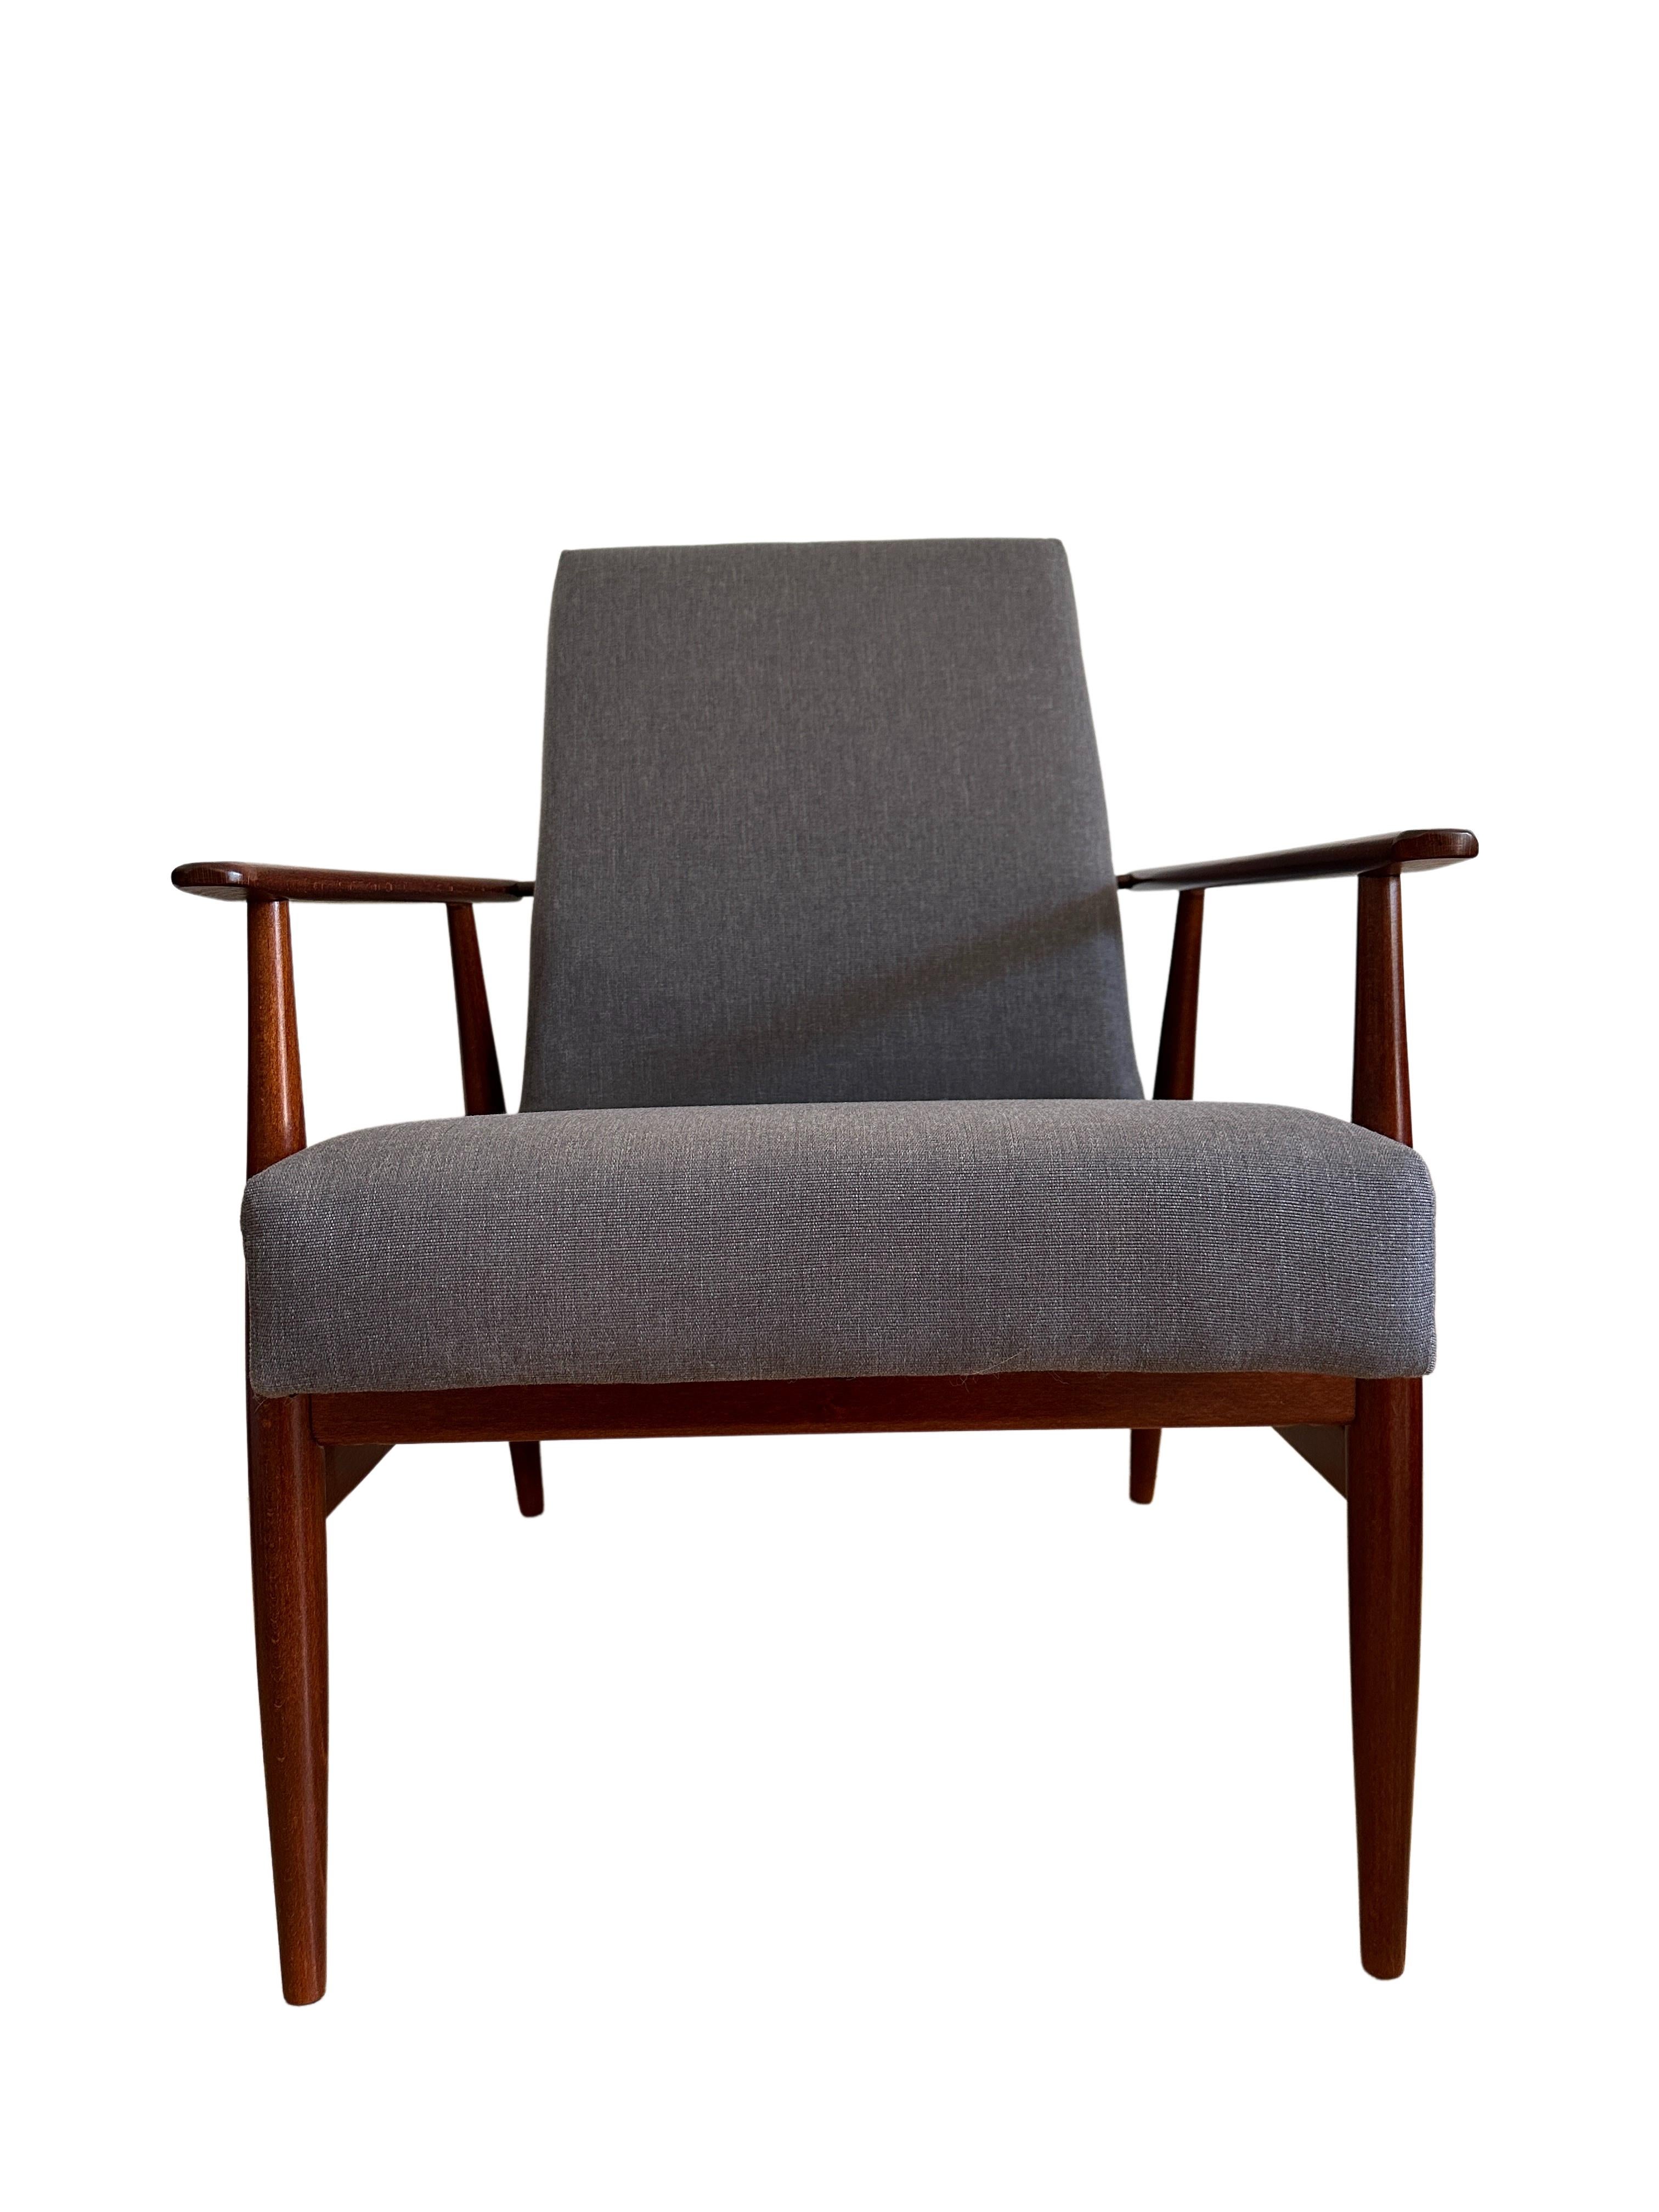 Midcentury Armchair in Kvadrat Upholstery by Henryk Lis, Europe, 1960s For Sale 2